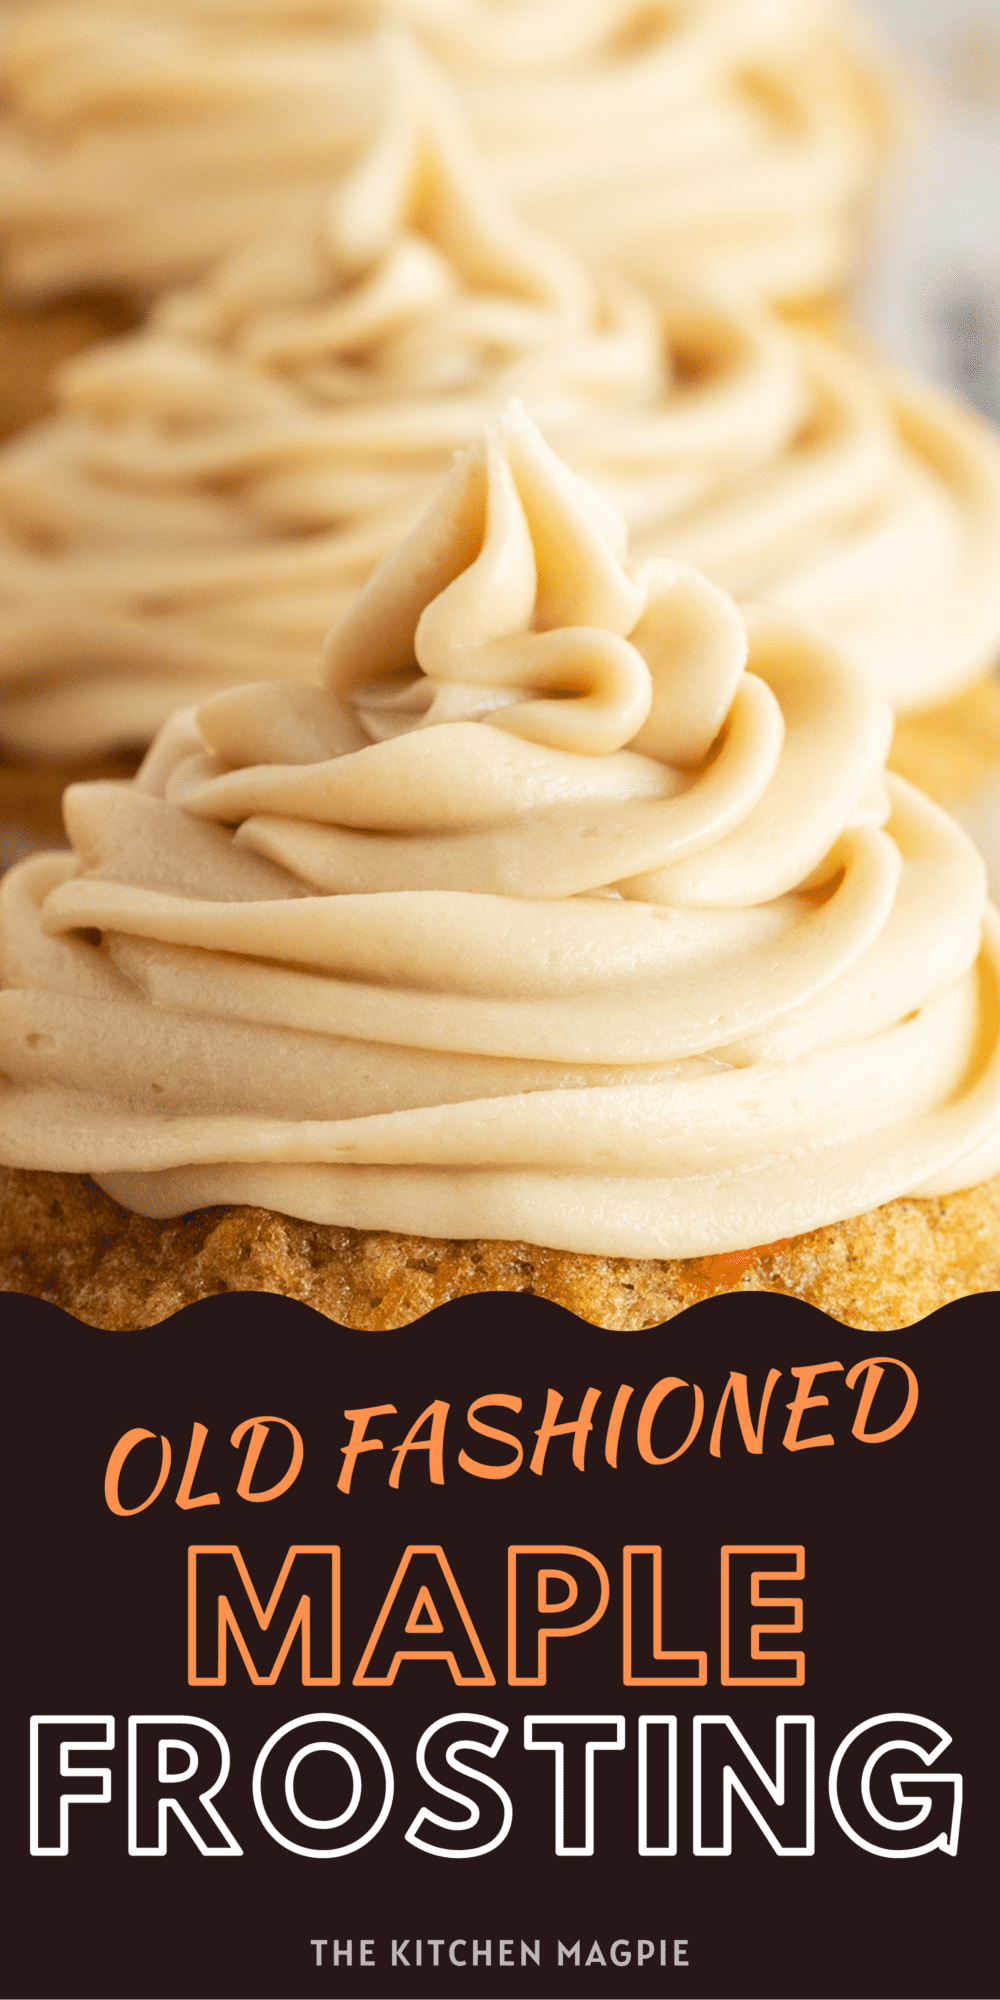 Simple to make and filled with that dark, silky sweet maple flavor, this maple frosting recipe is sure to become your new favorite frosting!